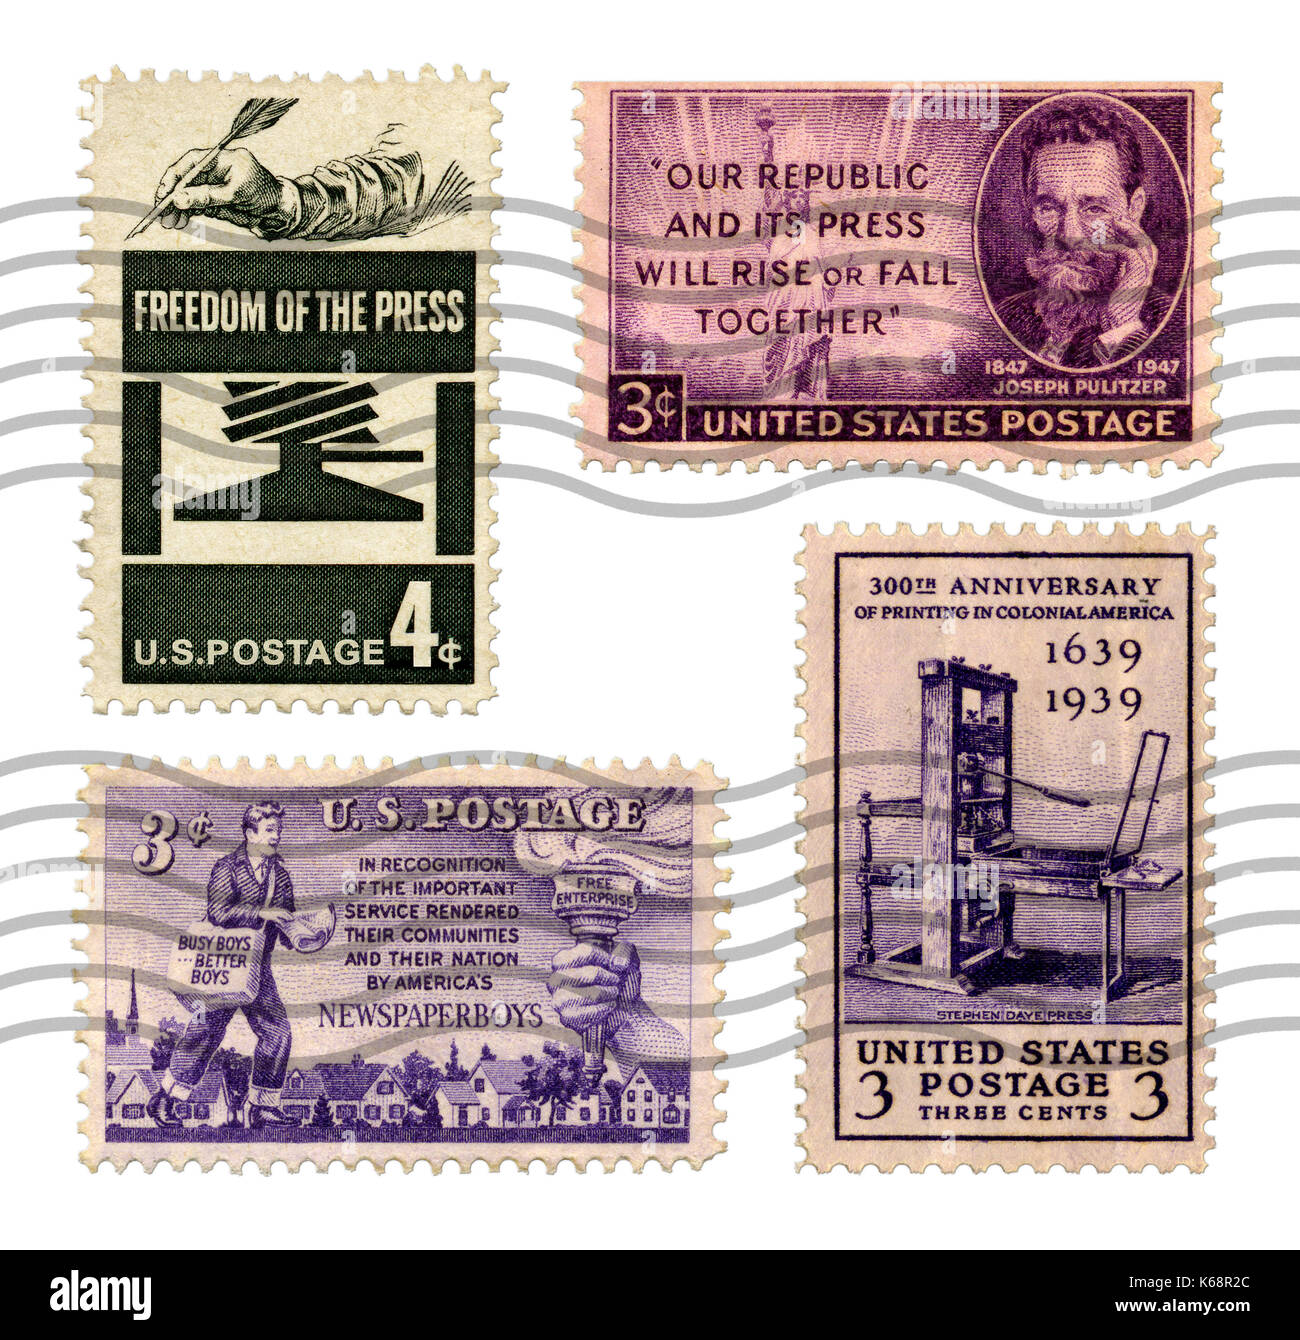 U.S. Postage Stamps commemorating the Freedom of the Press, free enterprise, newspaper boys, the printing press in America, Stephen Daye, and Joseph P Stock Photo